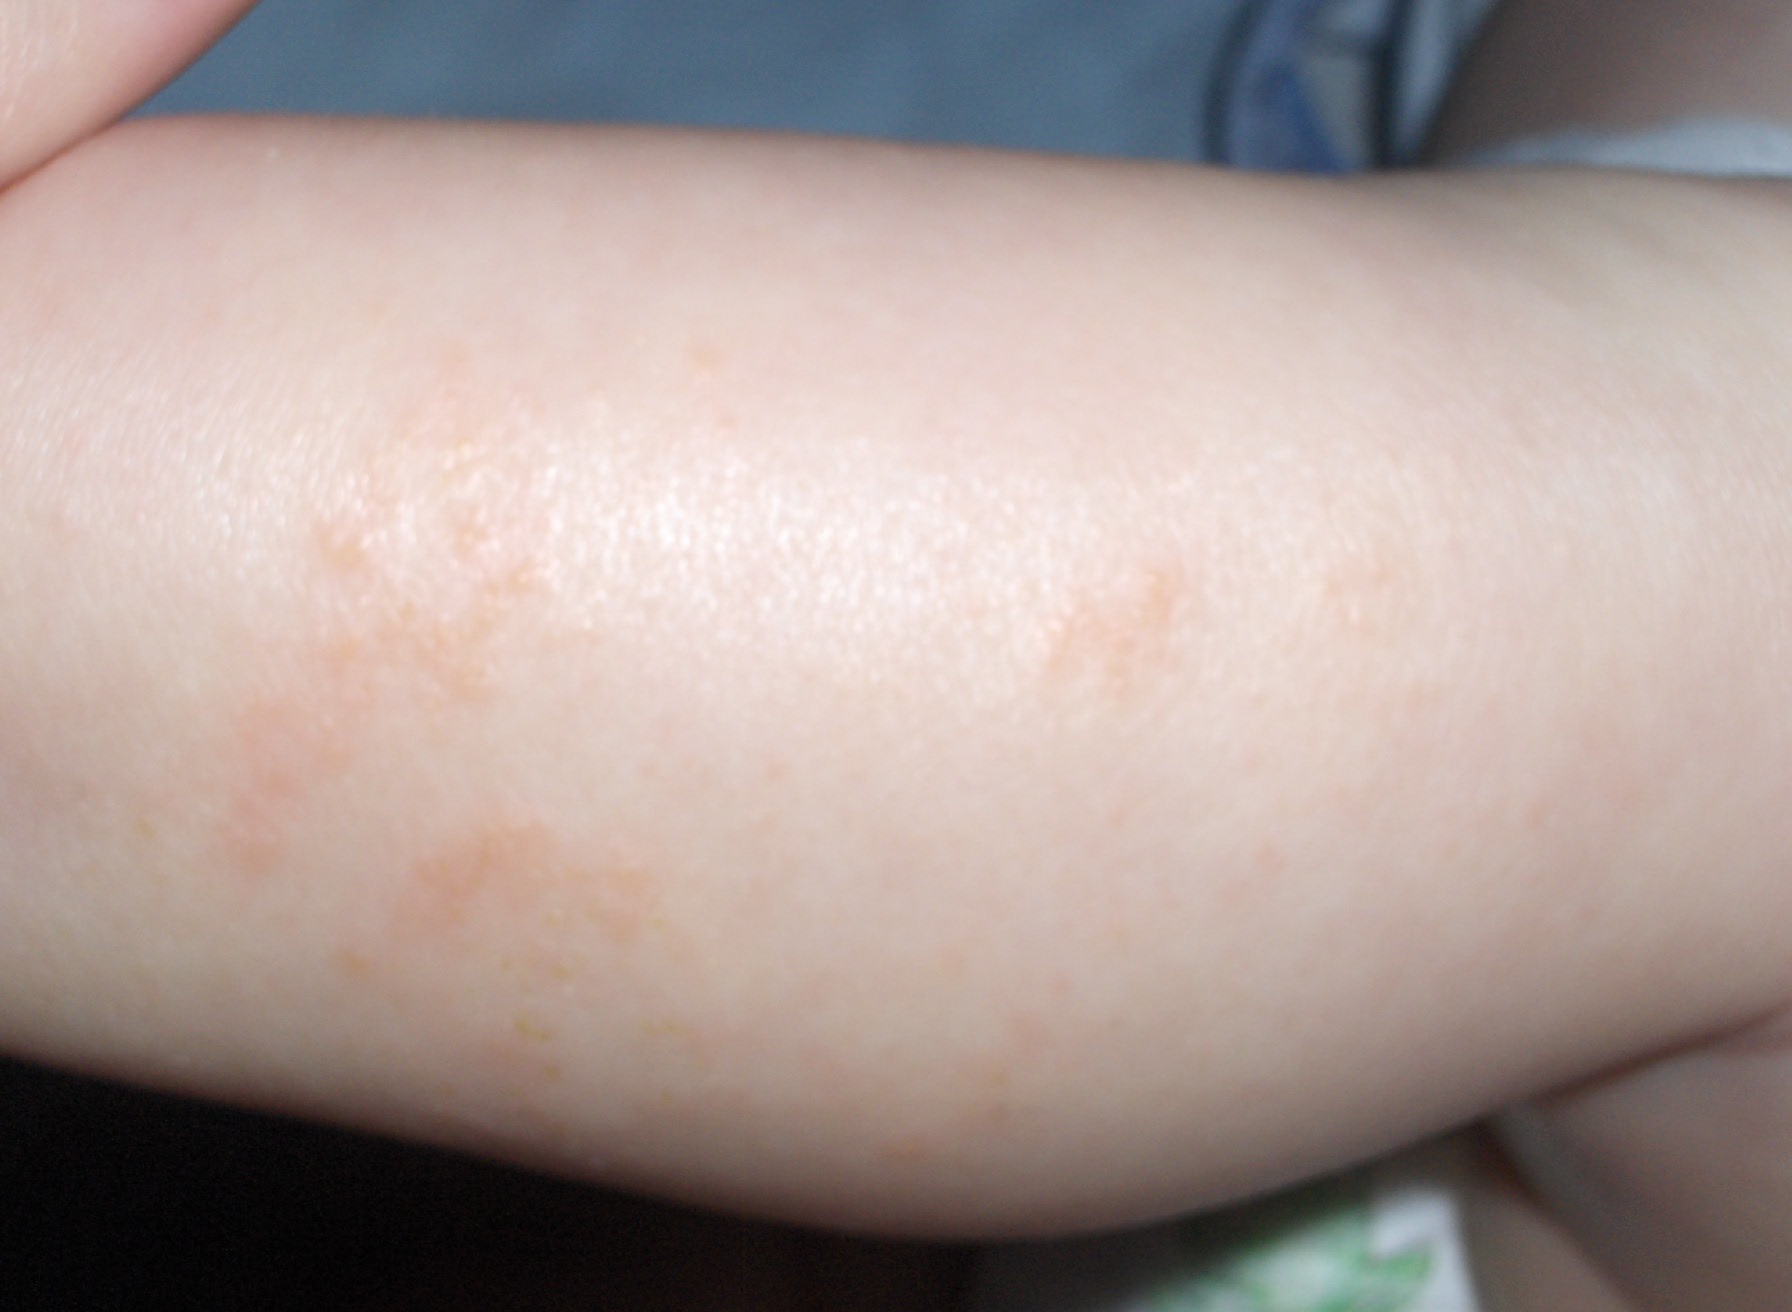 Psoriasis vs Eczema: What is the difference? View 18 Photos